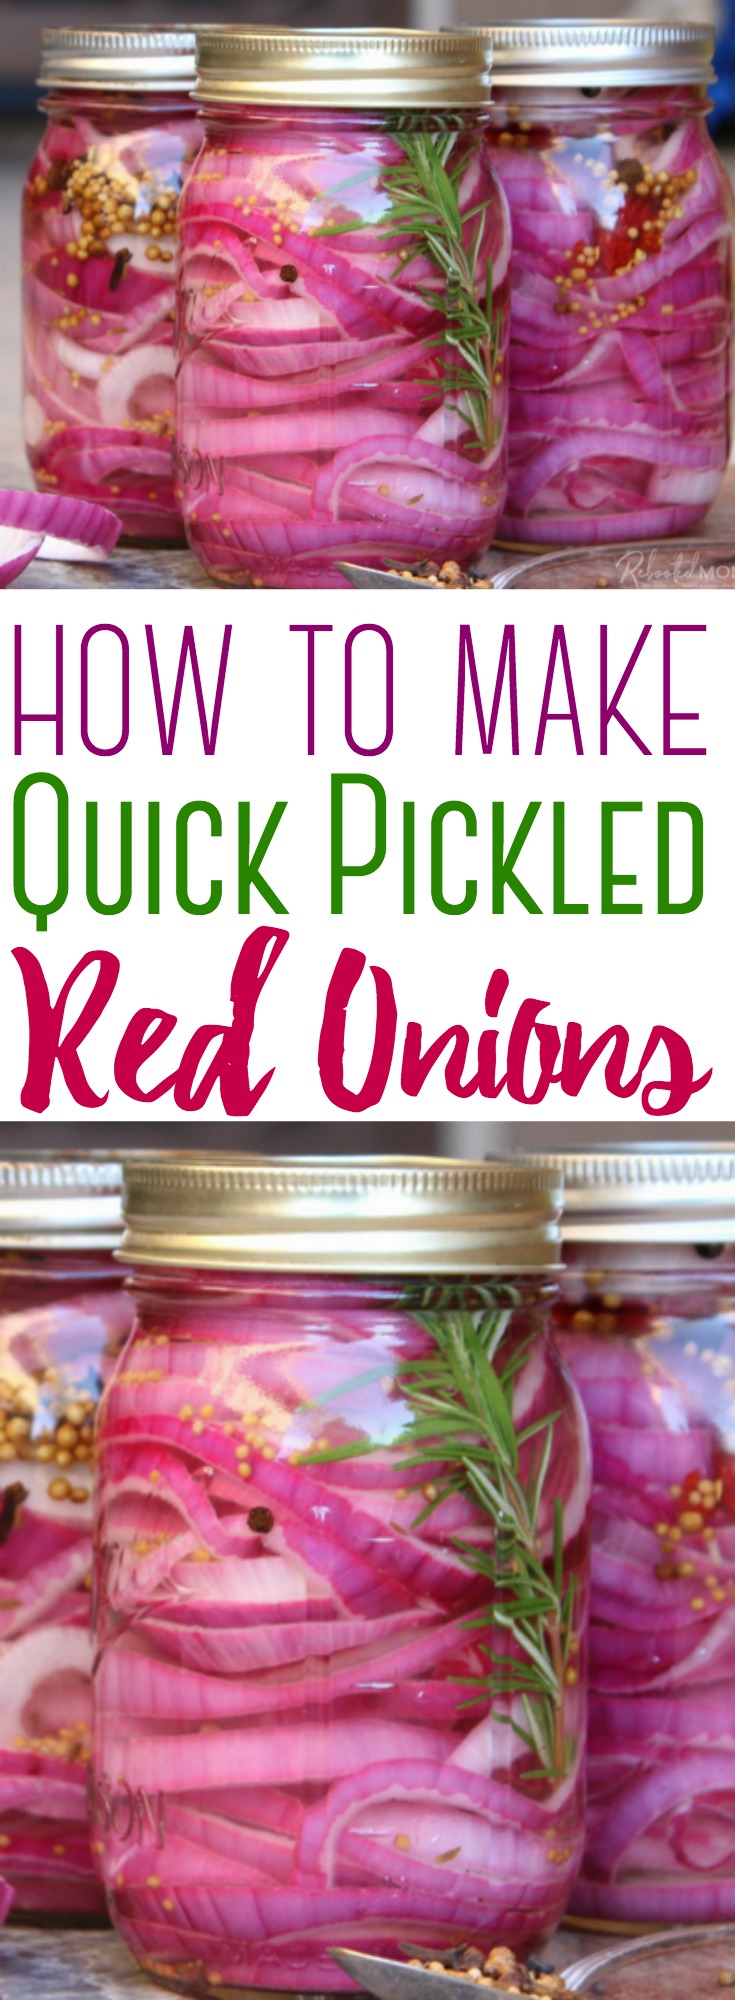 Learn how to make the best quick-pickled red onions, with a flavorful brine that can be easily adapted to suit your taste! These pickled red onions compliment any meal!